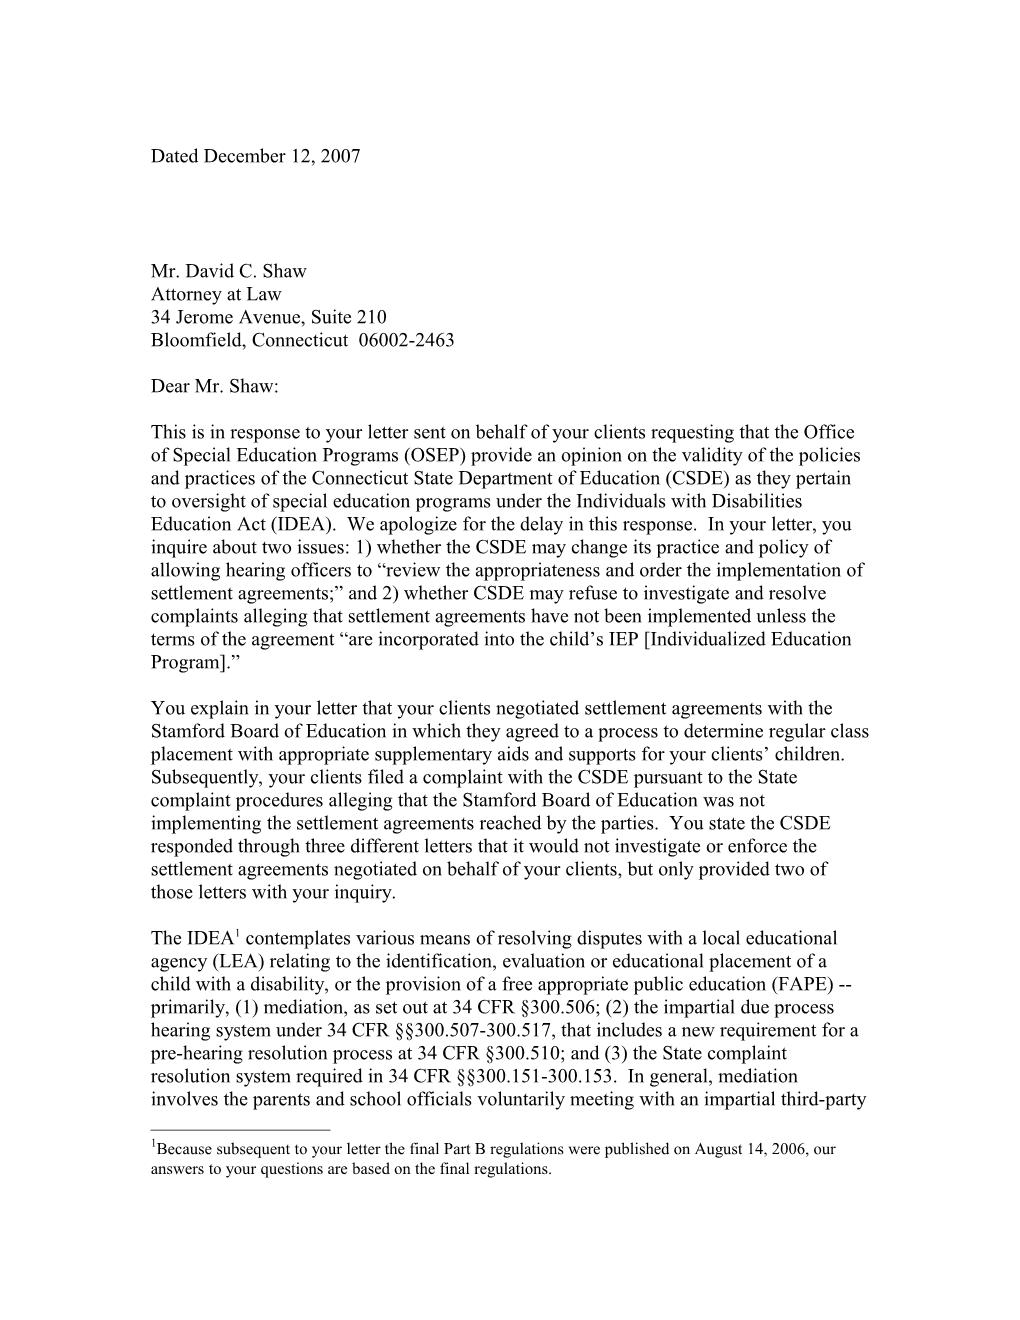 Shaw Letter Dated 12/12/07 Re: Impartial Due Process Hearing (MS Word)